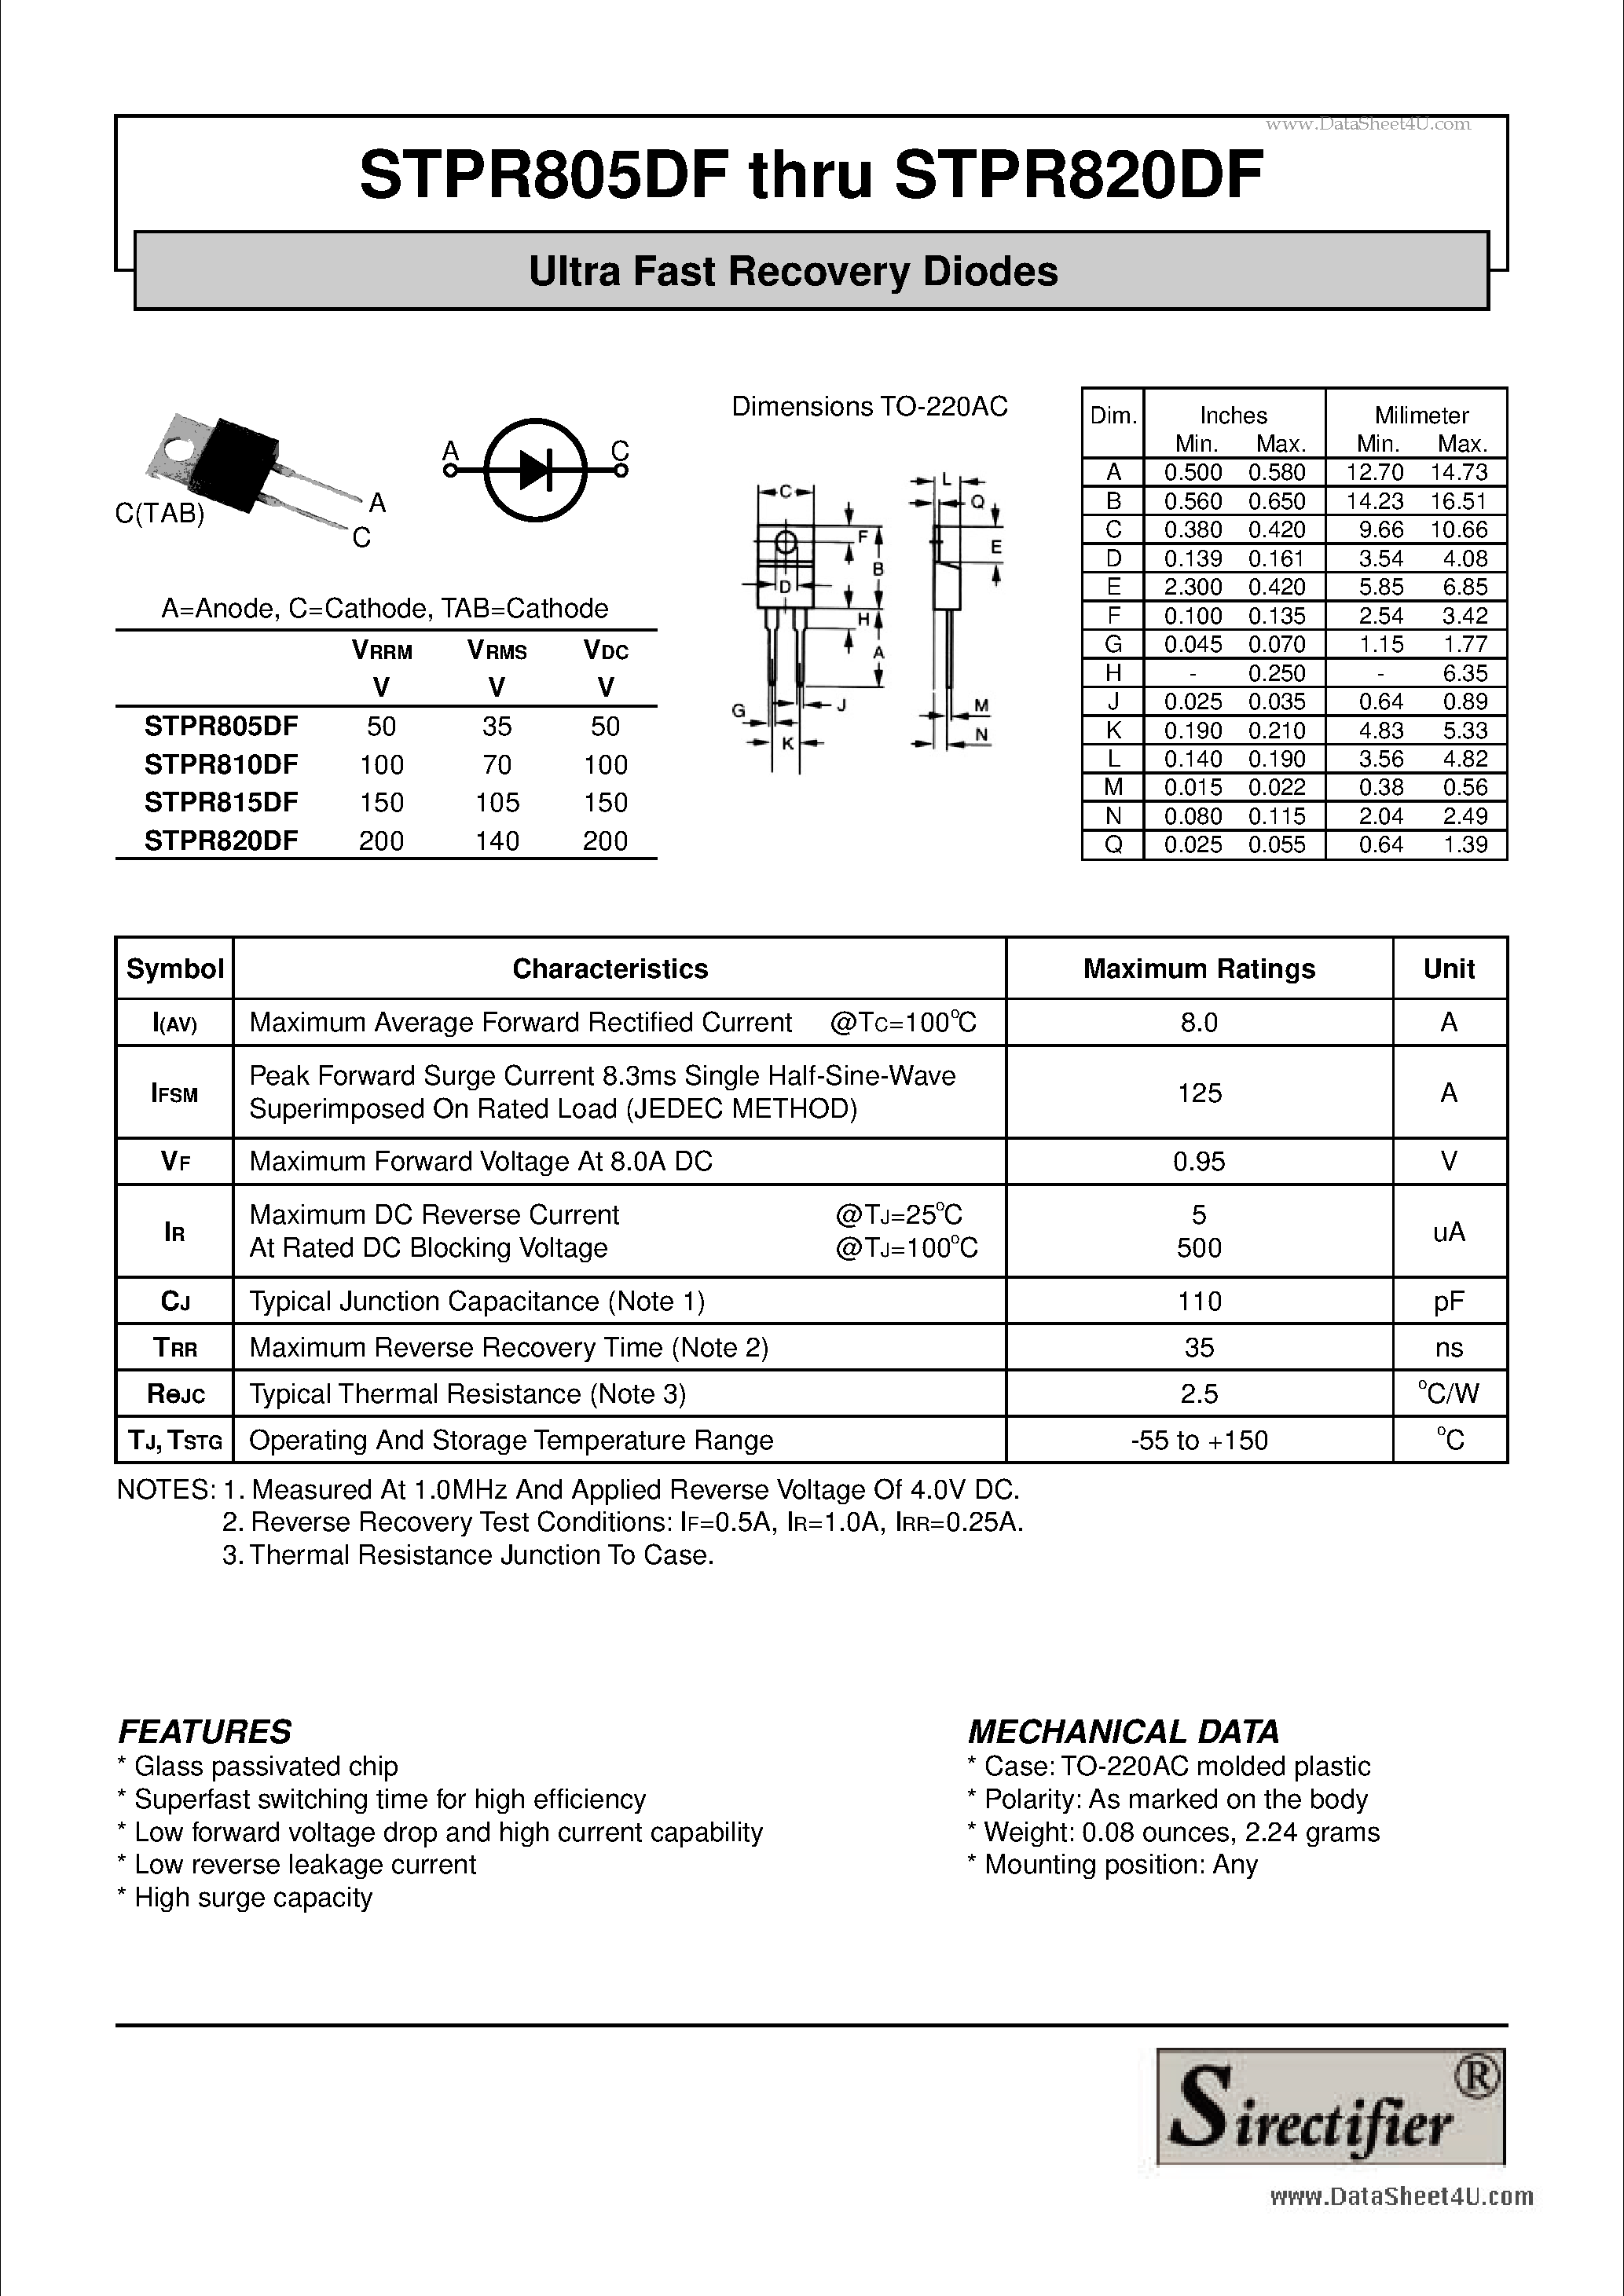 Даташит STPR805DF - Ultra Fast Recovery Diodes страница 1